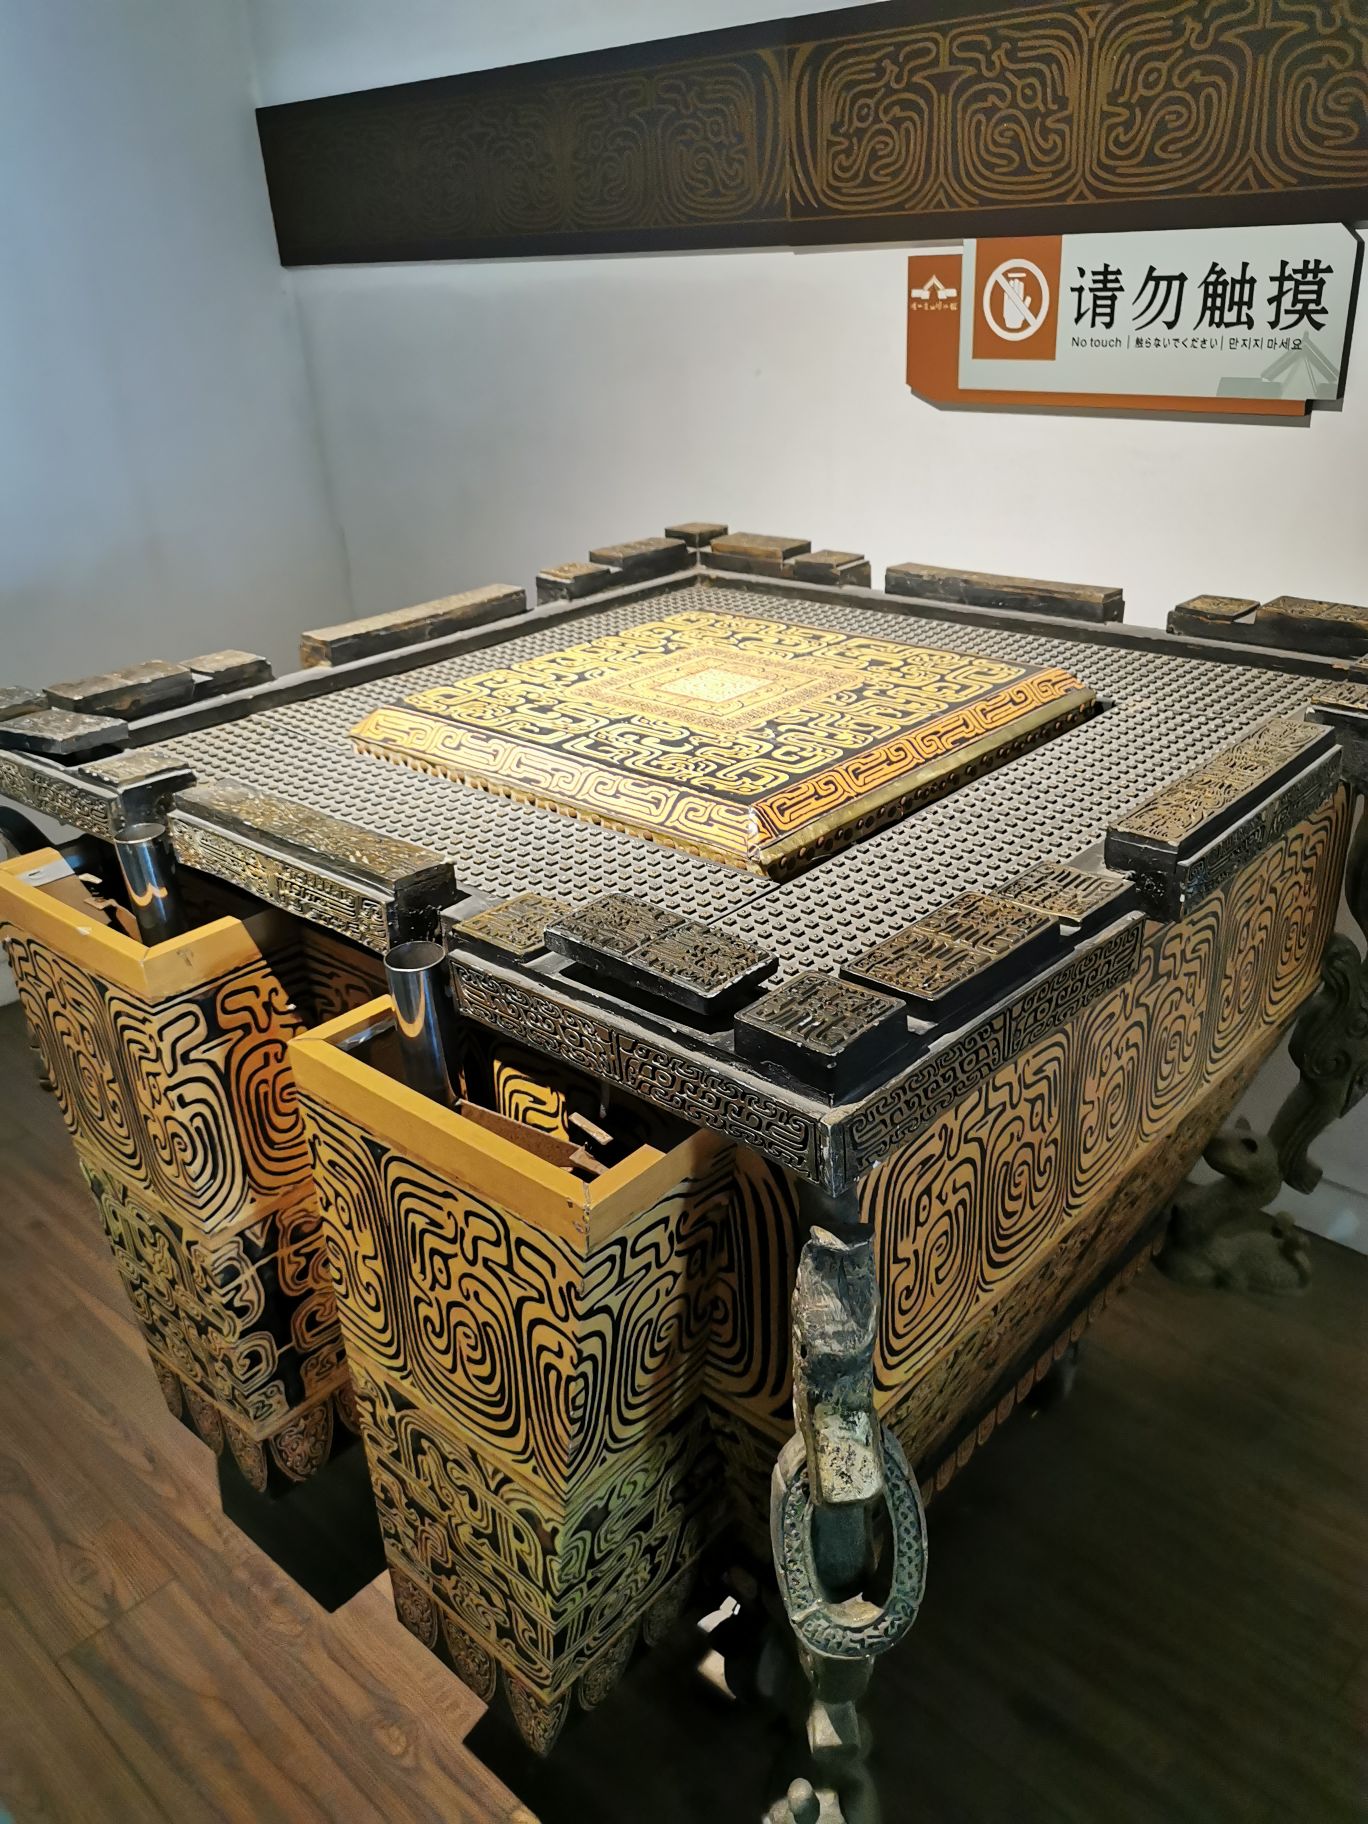 Hongshan Historical Site Museum attraction reviews - Hongshan Historical  Site Museum tickets - Hongshan Historical Site Museum discounts - Hongshan  Historical Site Museum transportation, address, opening hours -  attractions, hotels, and food